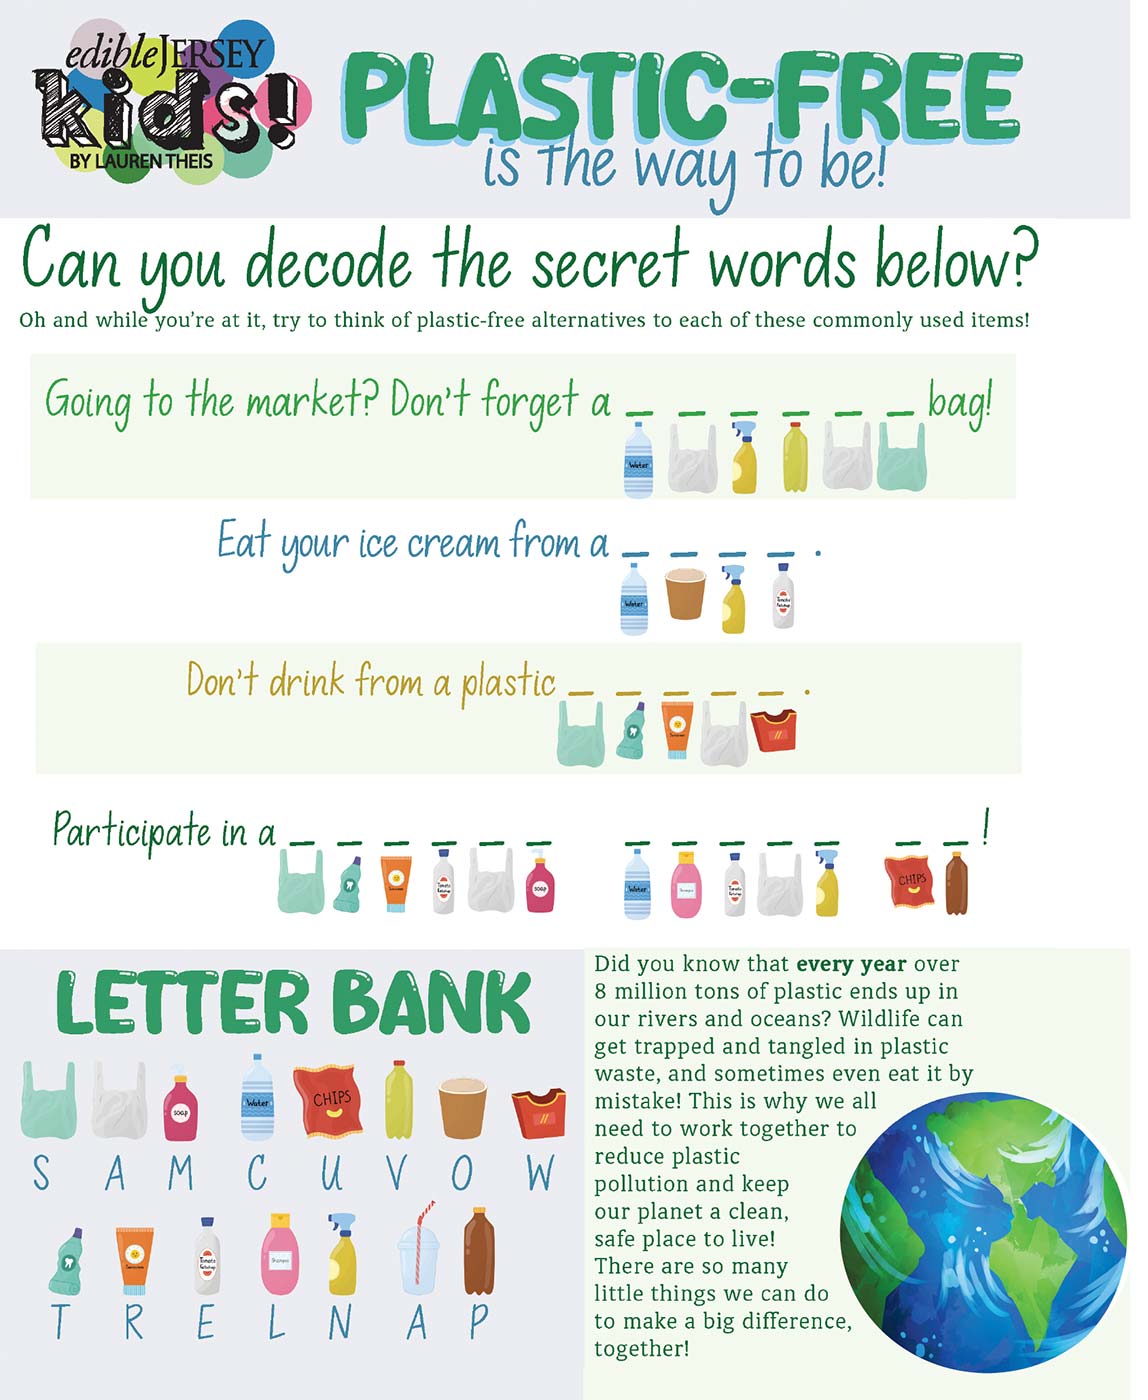 Plastic Free is the way to be - a fun activity sheet for kids